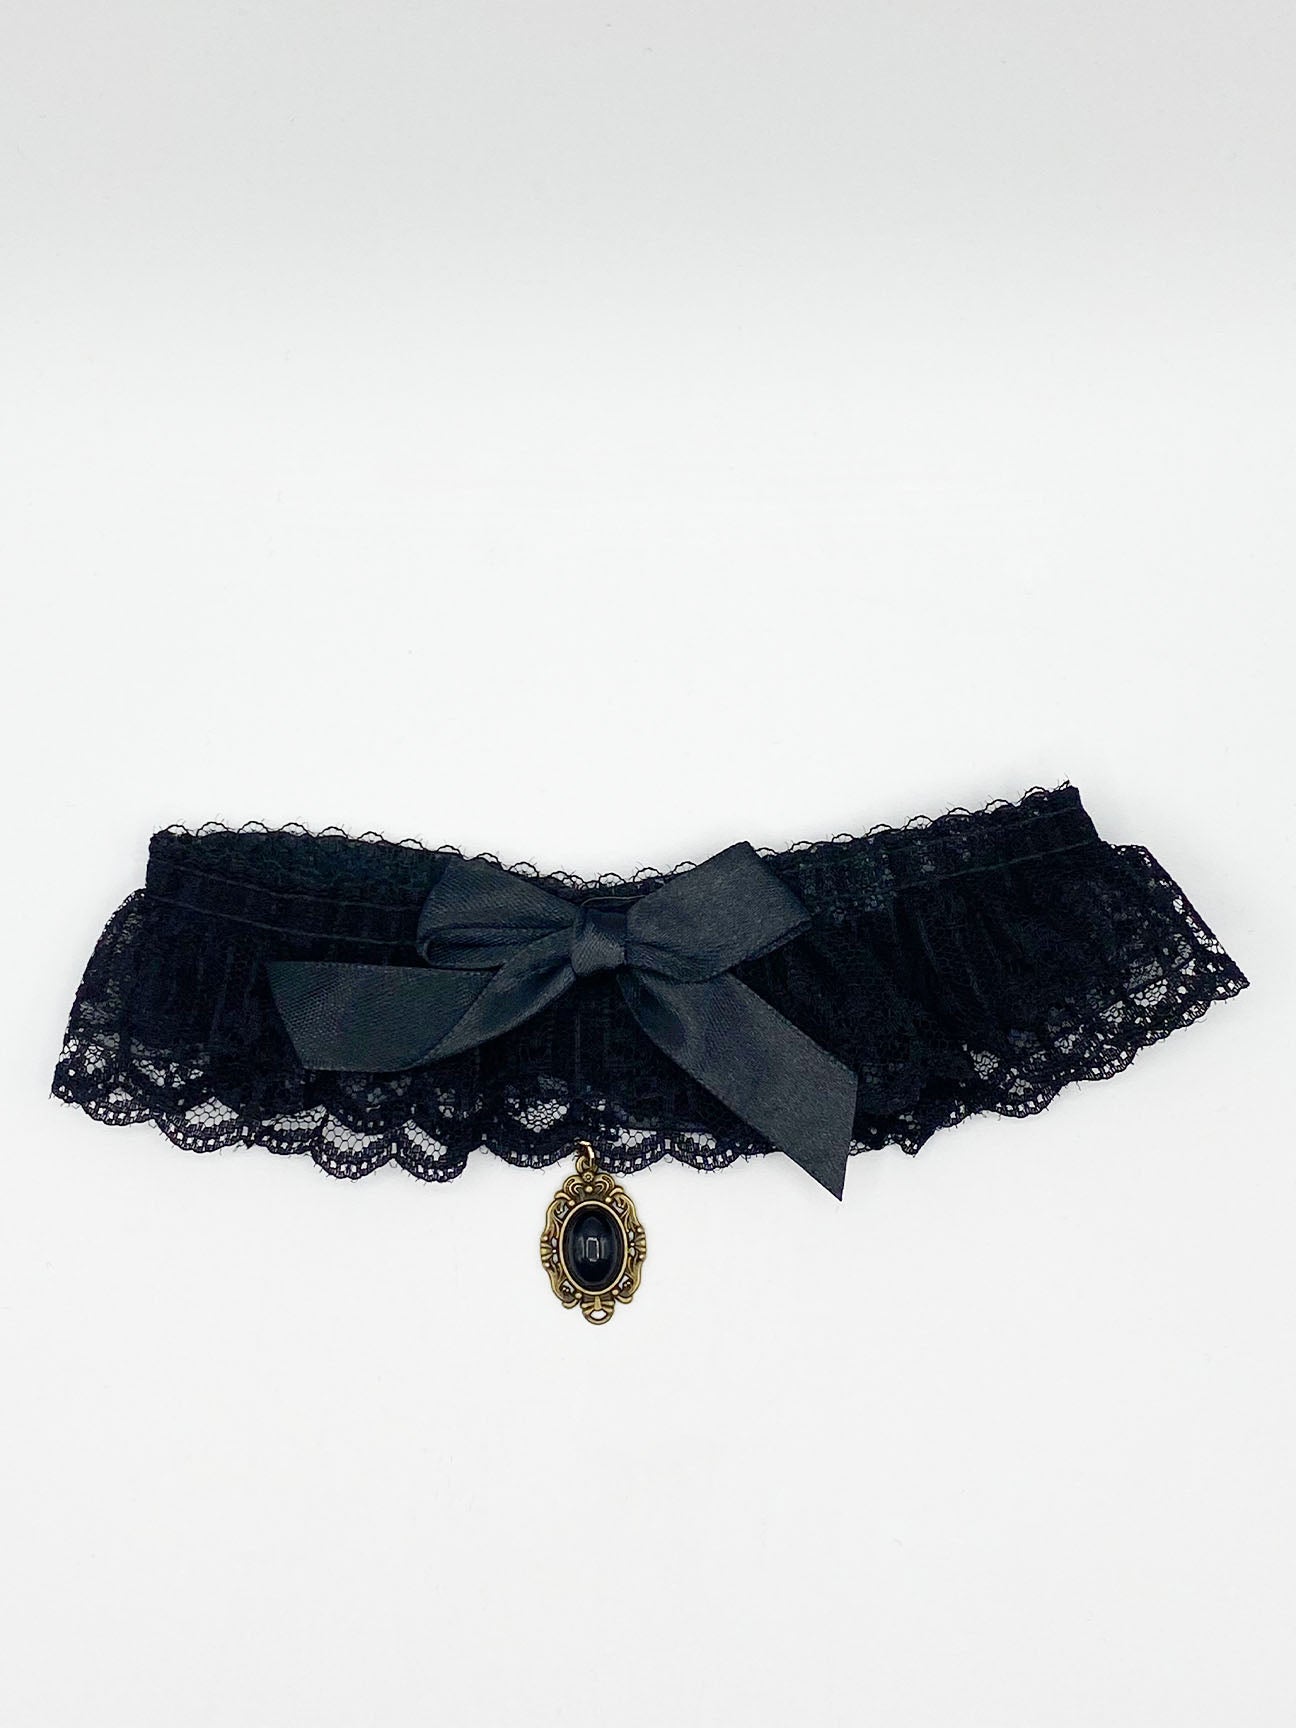 Black Gathered Lace Choker With Satin Bow And Droplet Stone